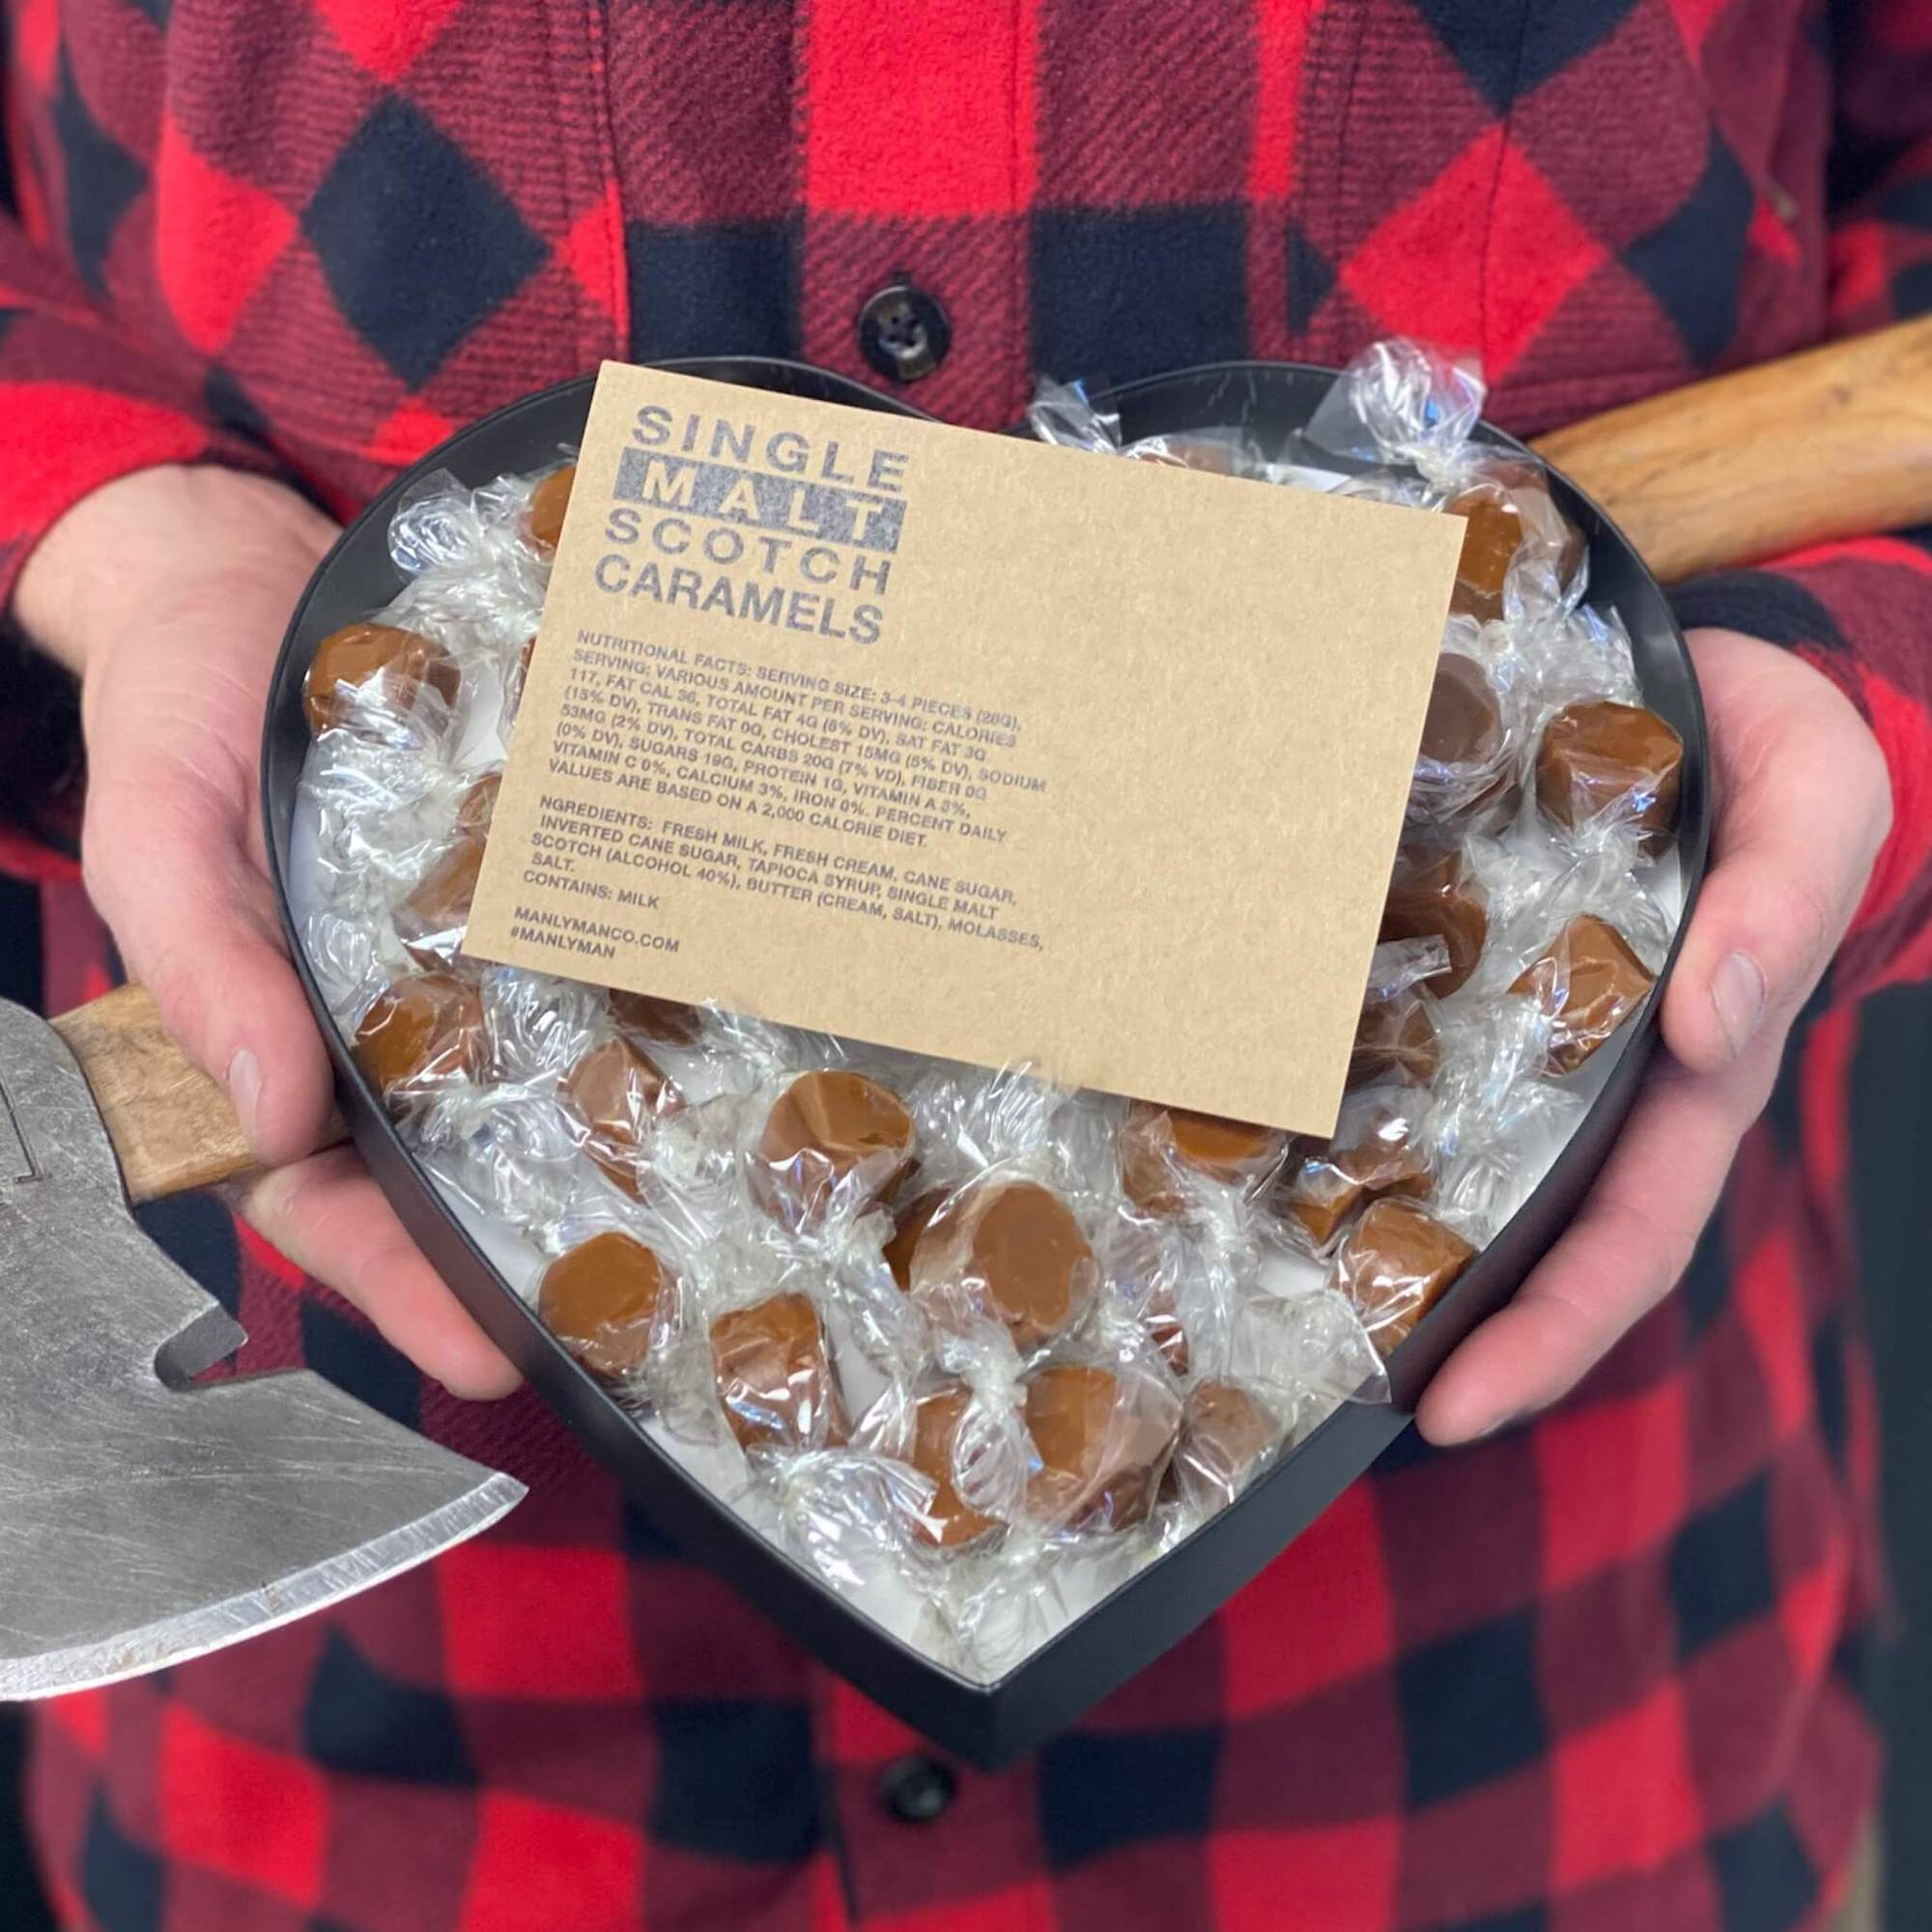 New heart-shaped gift box, filled with single malt scotch caramels, being held by man in flannel shirt